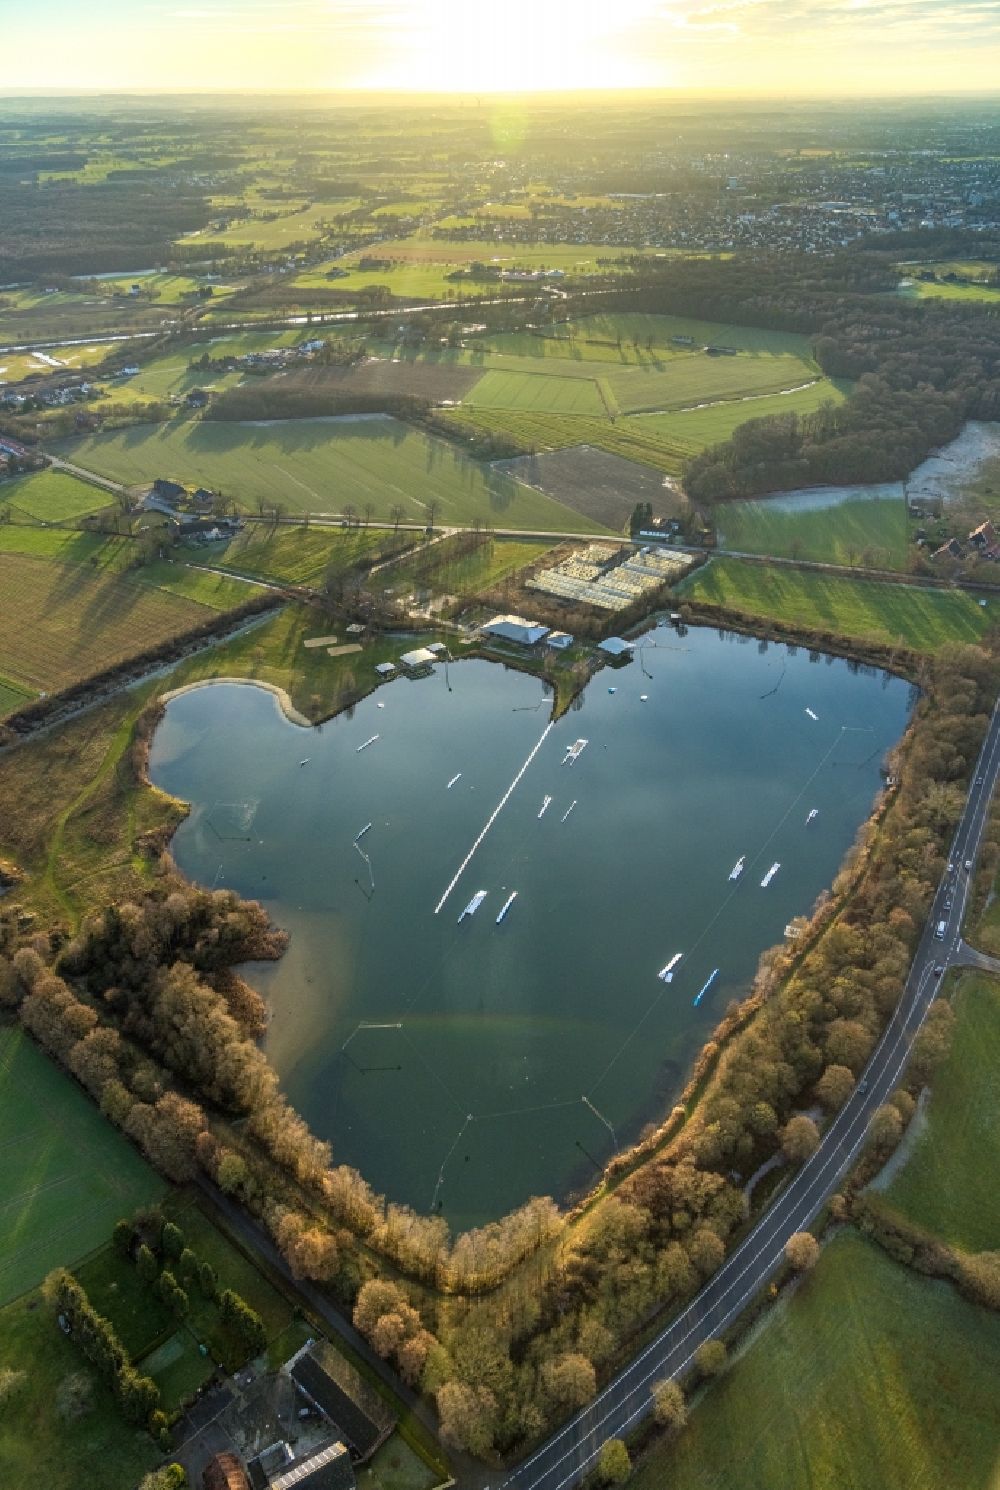 Hamm from the bird's eye view: Leisure center of water skiing - racetrack in Hamm in the state North Rhine-Westphalia